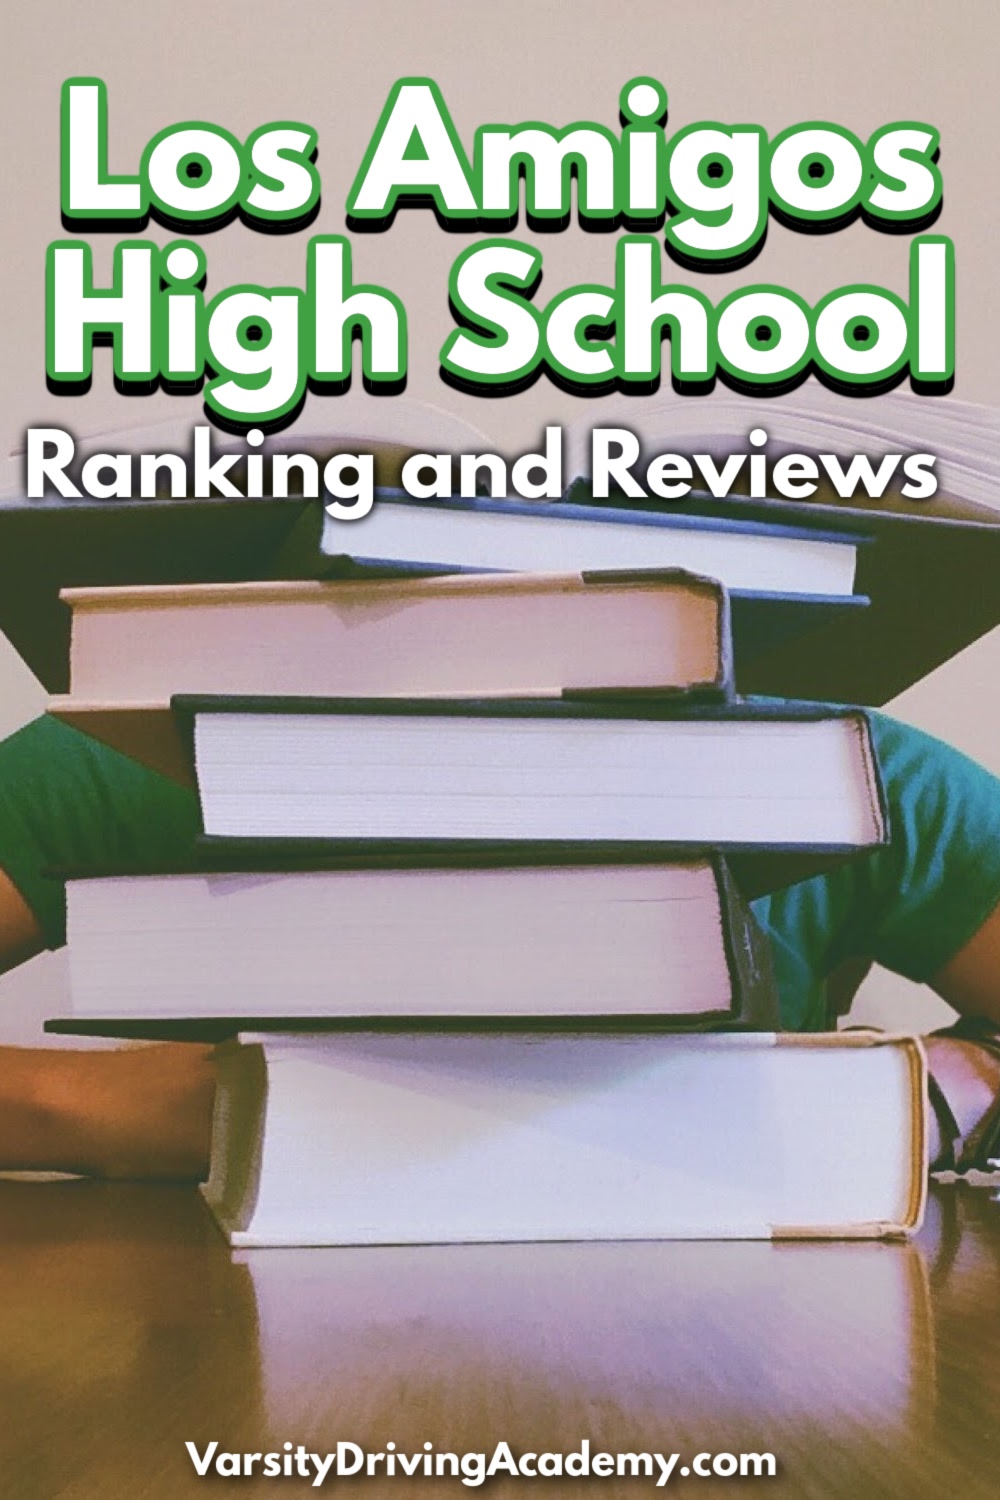 The Los Amigos High School ranking will help parents, students and even faculty know where things can be improved and learn how to improve them.